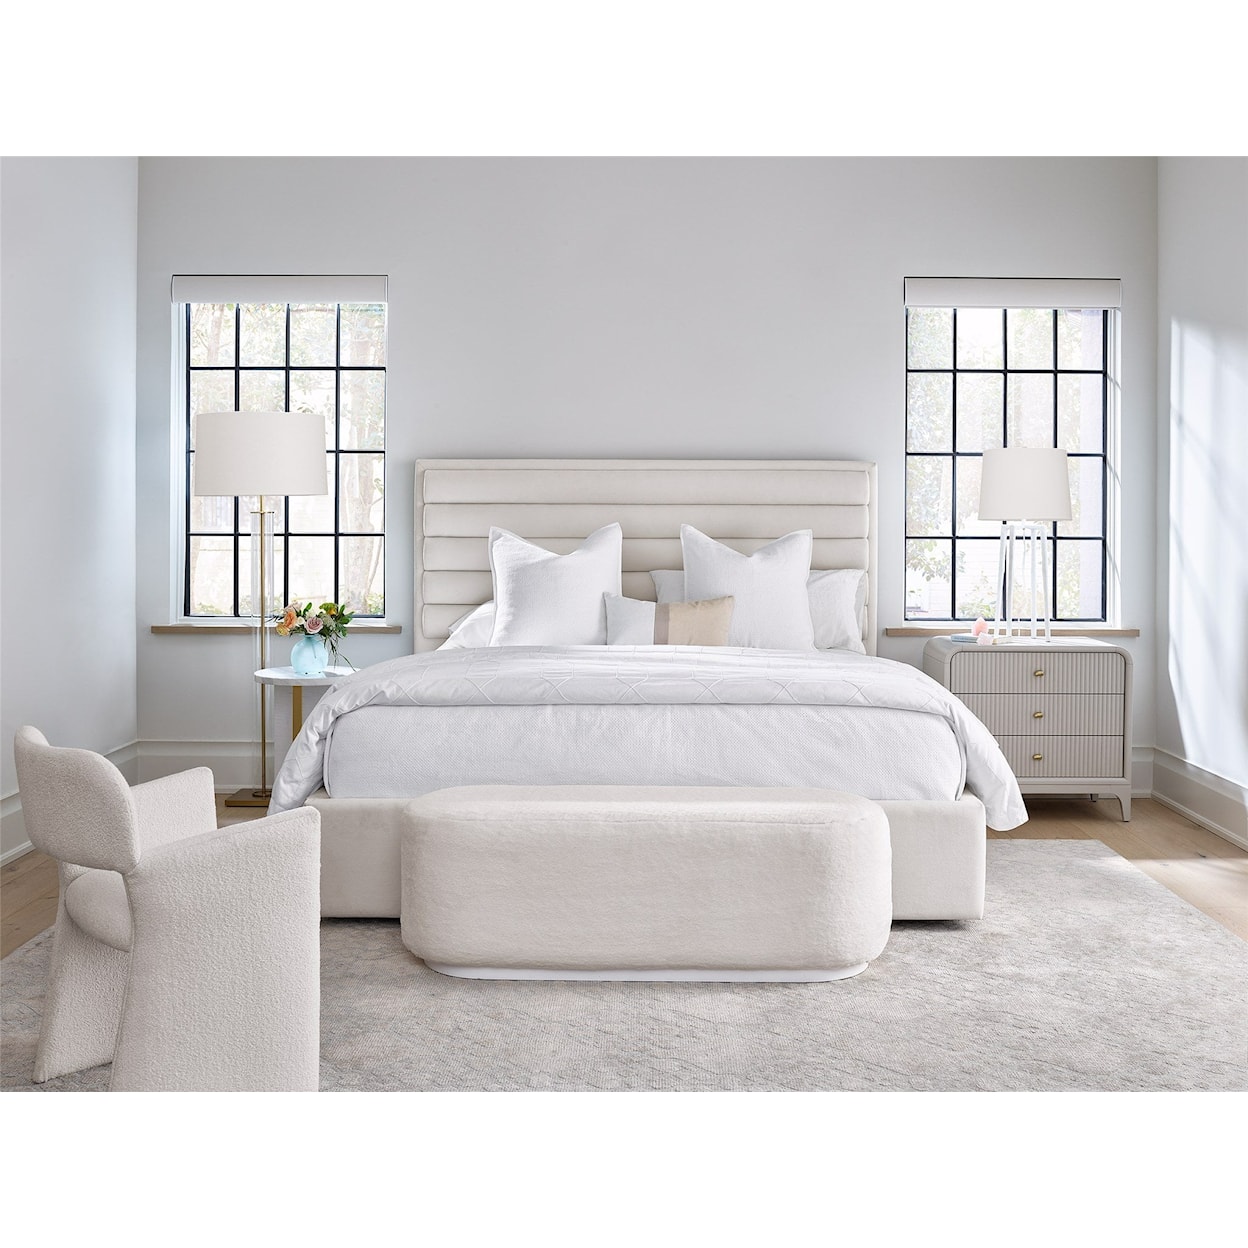 Universal Tranquility - Miranda Kerr Home Tranquility Upholstered Bed Queen